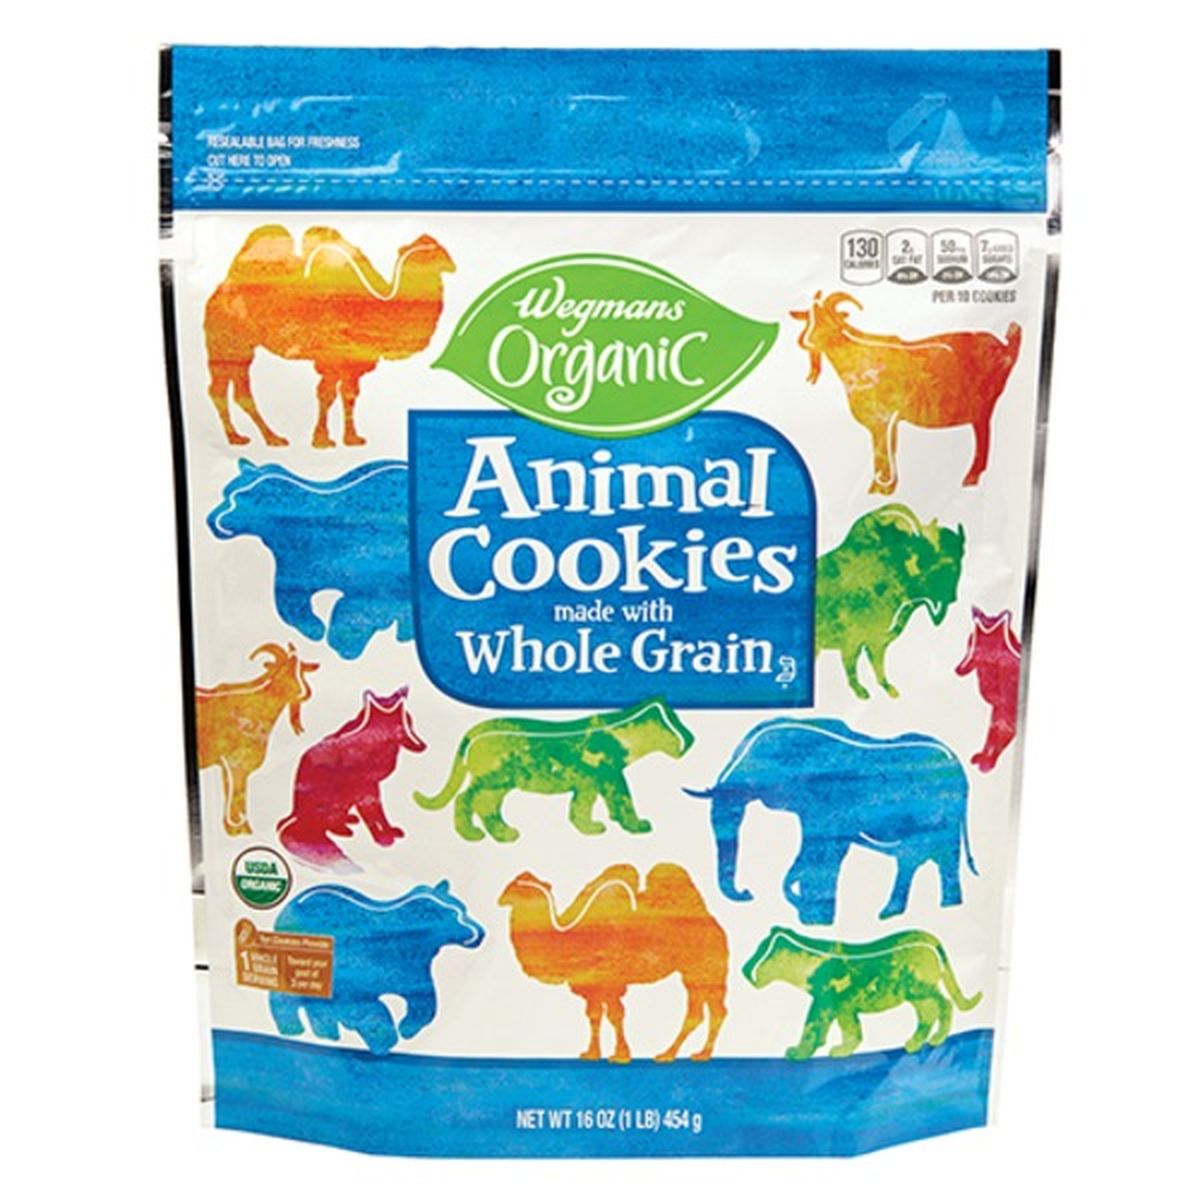 Calories in Wegmans Organic Animal Cookies made with Whole Grain